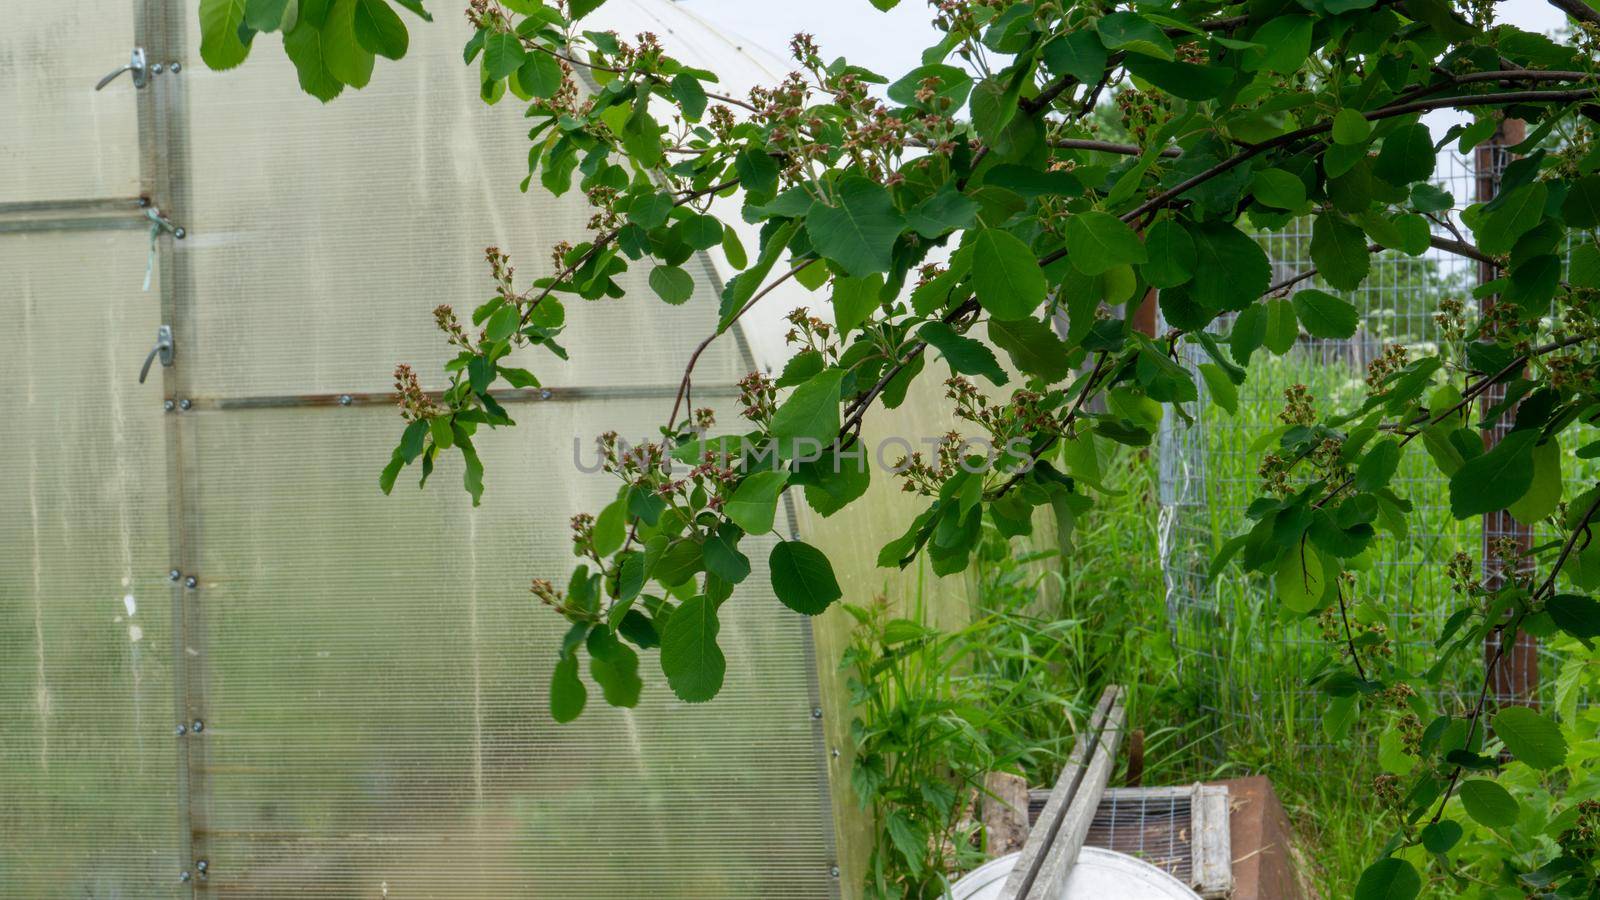 Shadberry Irga on a garden plot with a greenhouse. Green berries of irgi tied up on a tree. by Asnia